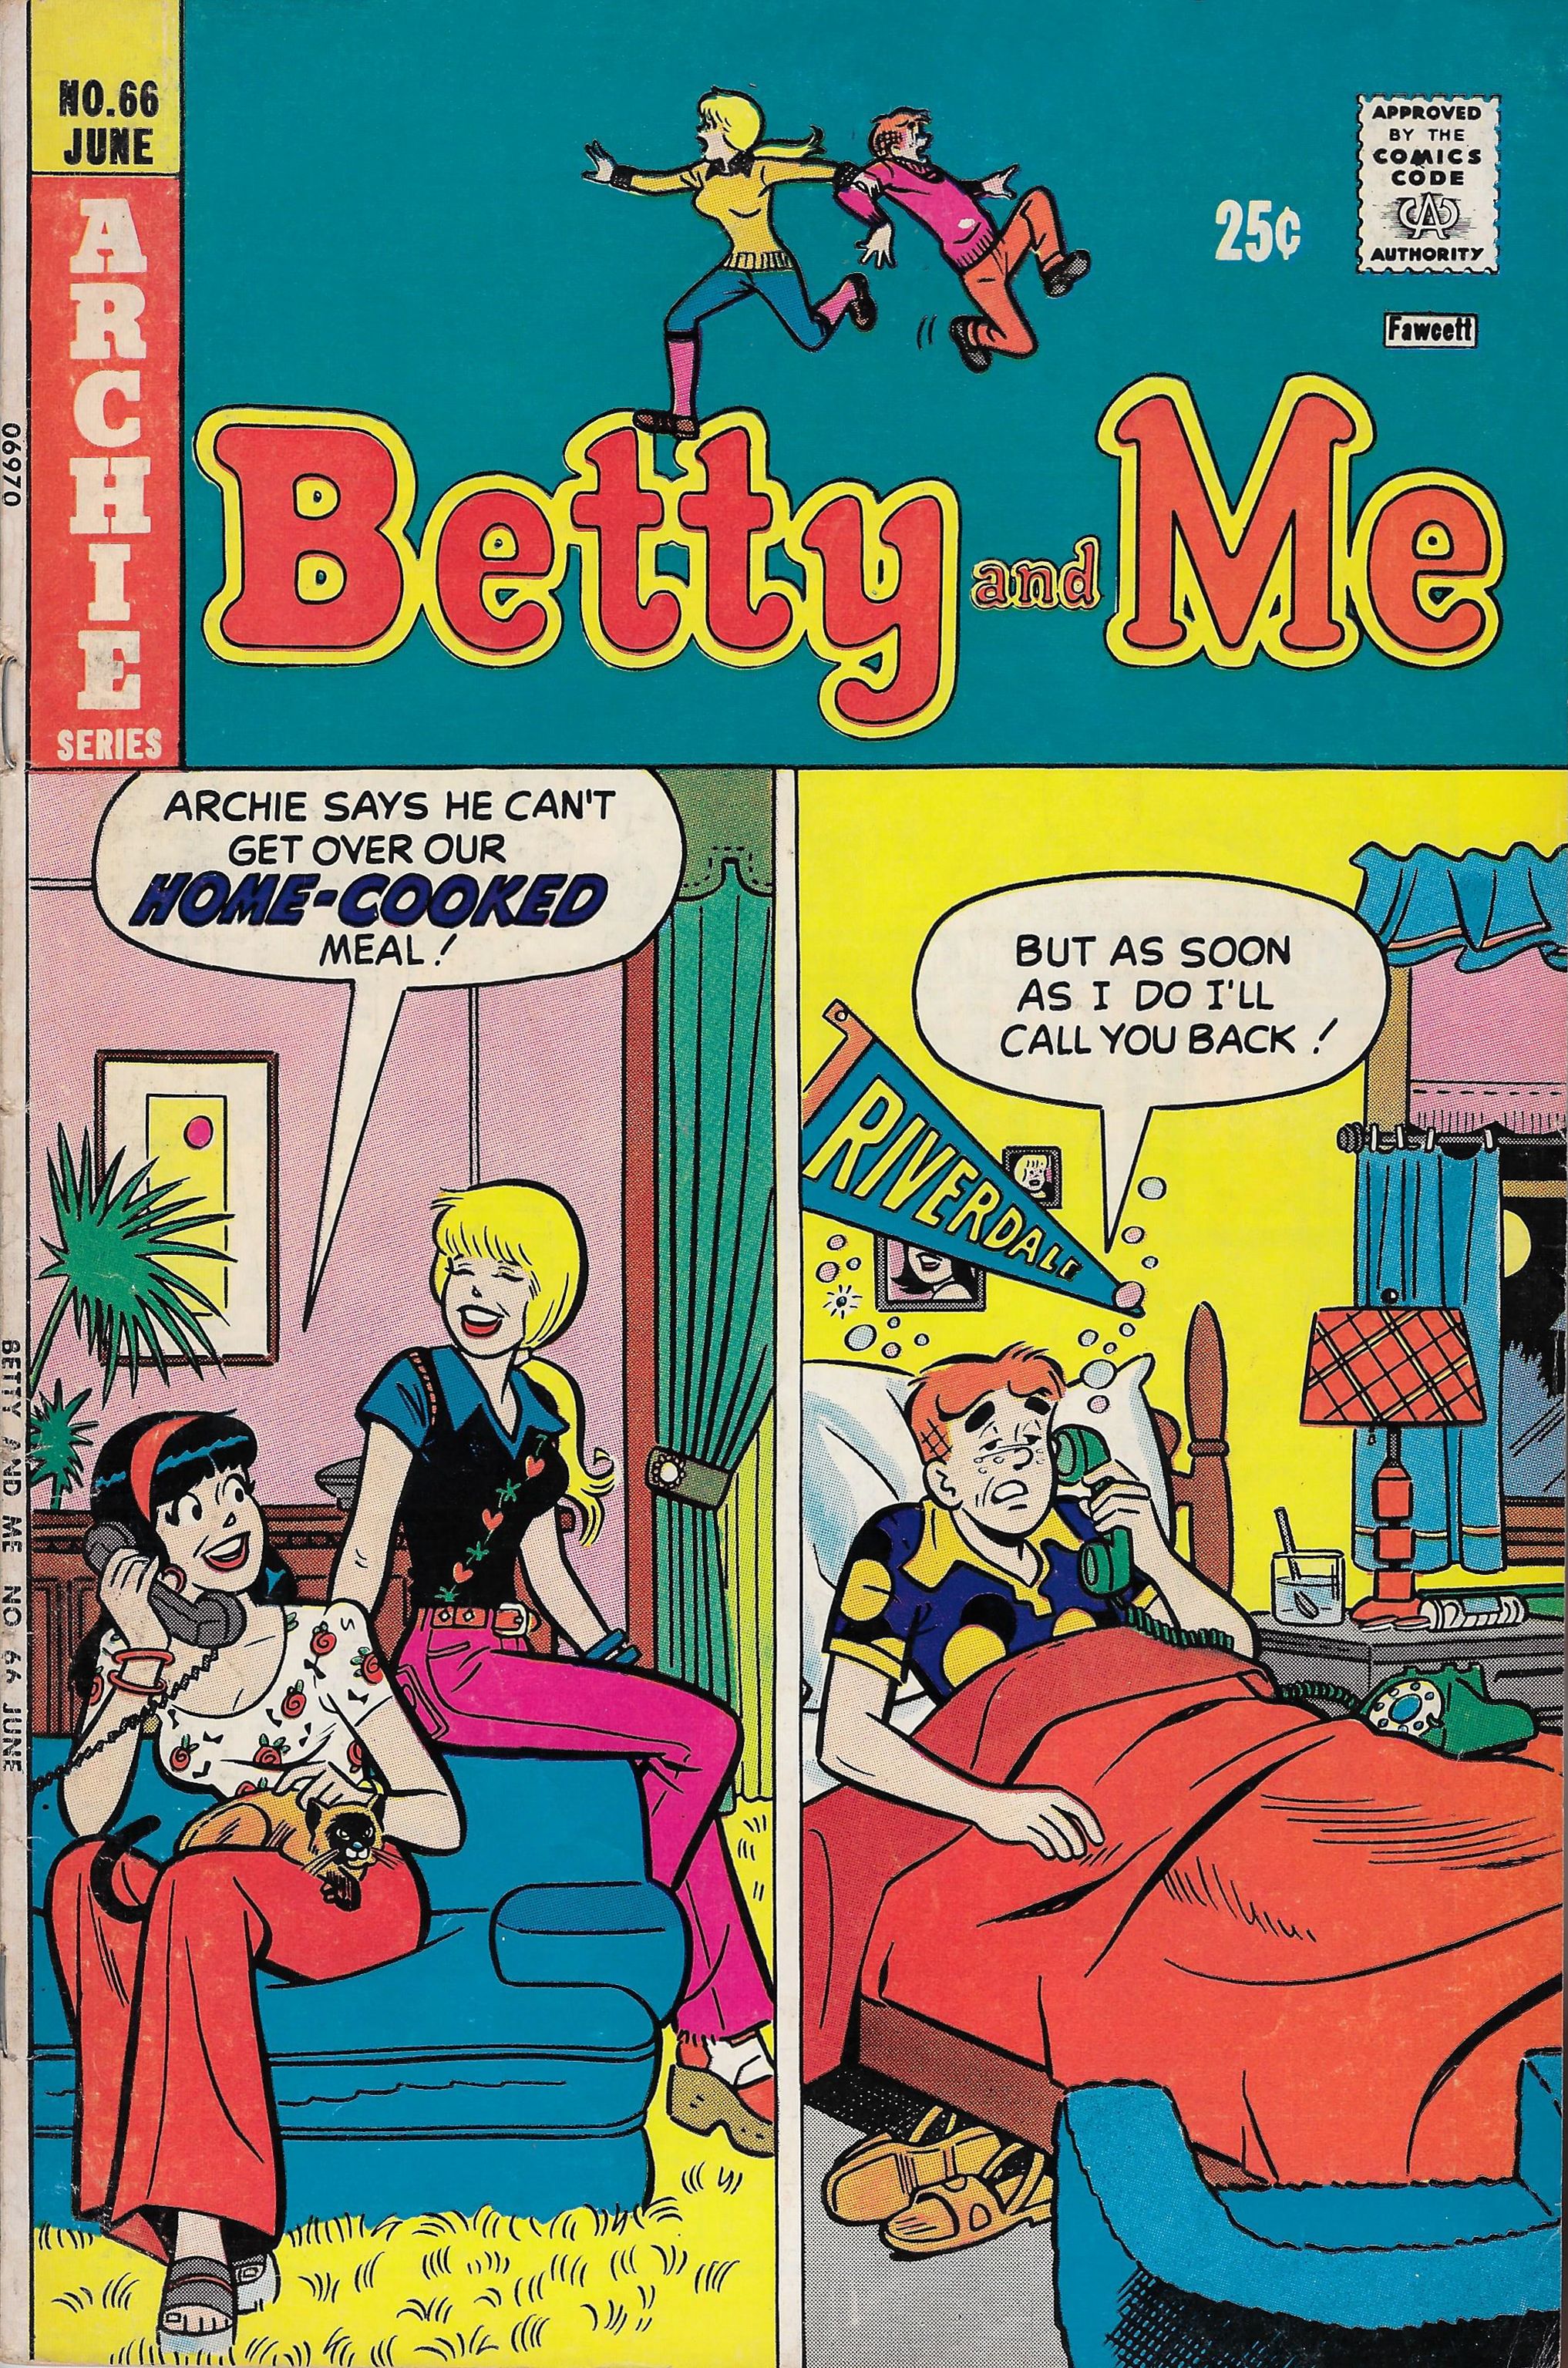 Read online Betty and Me comic -  Issue #66 - 1